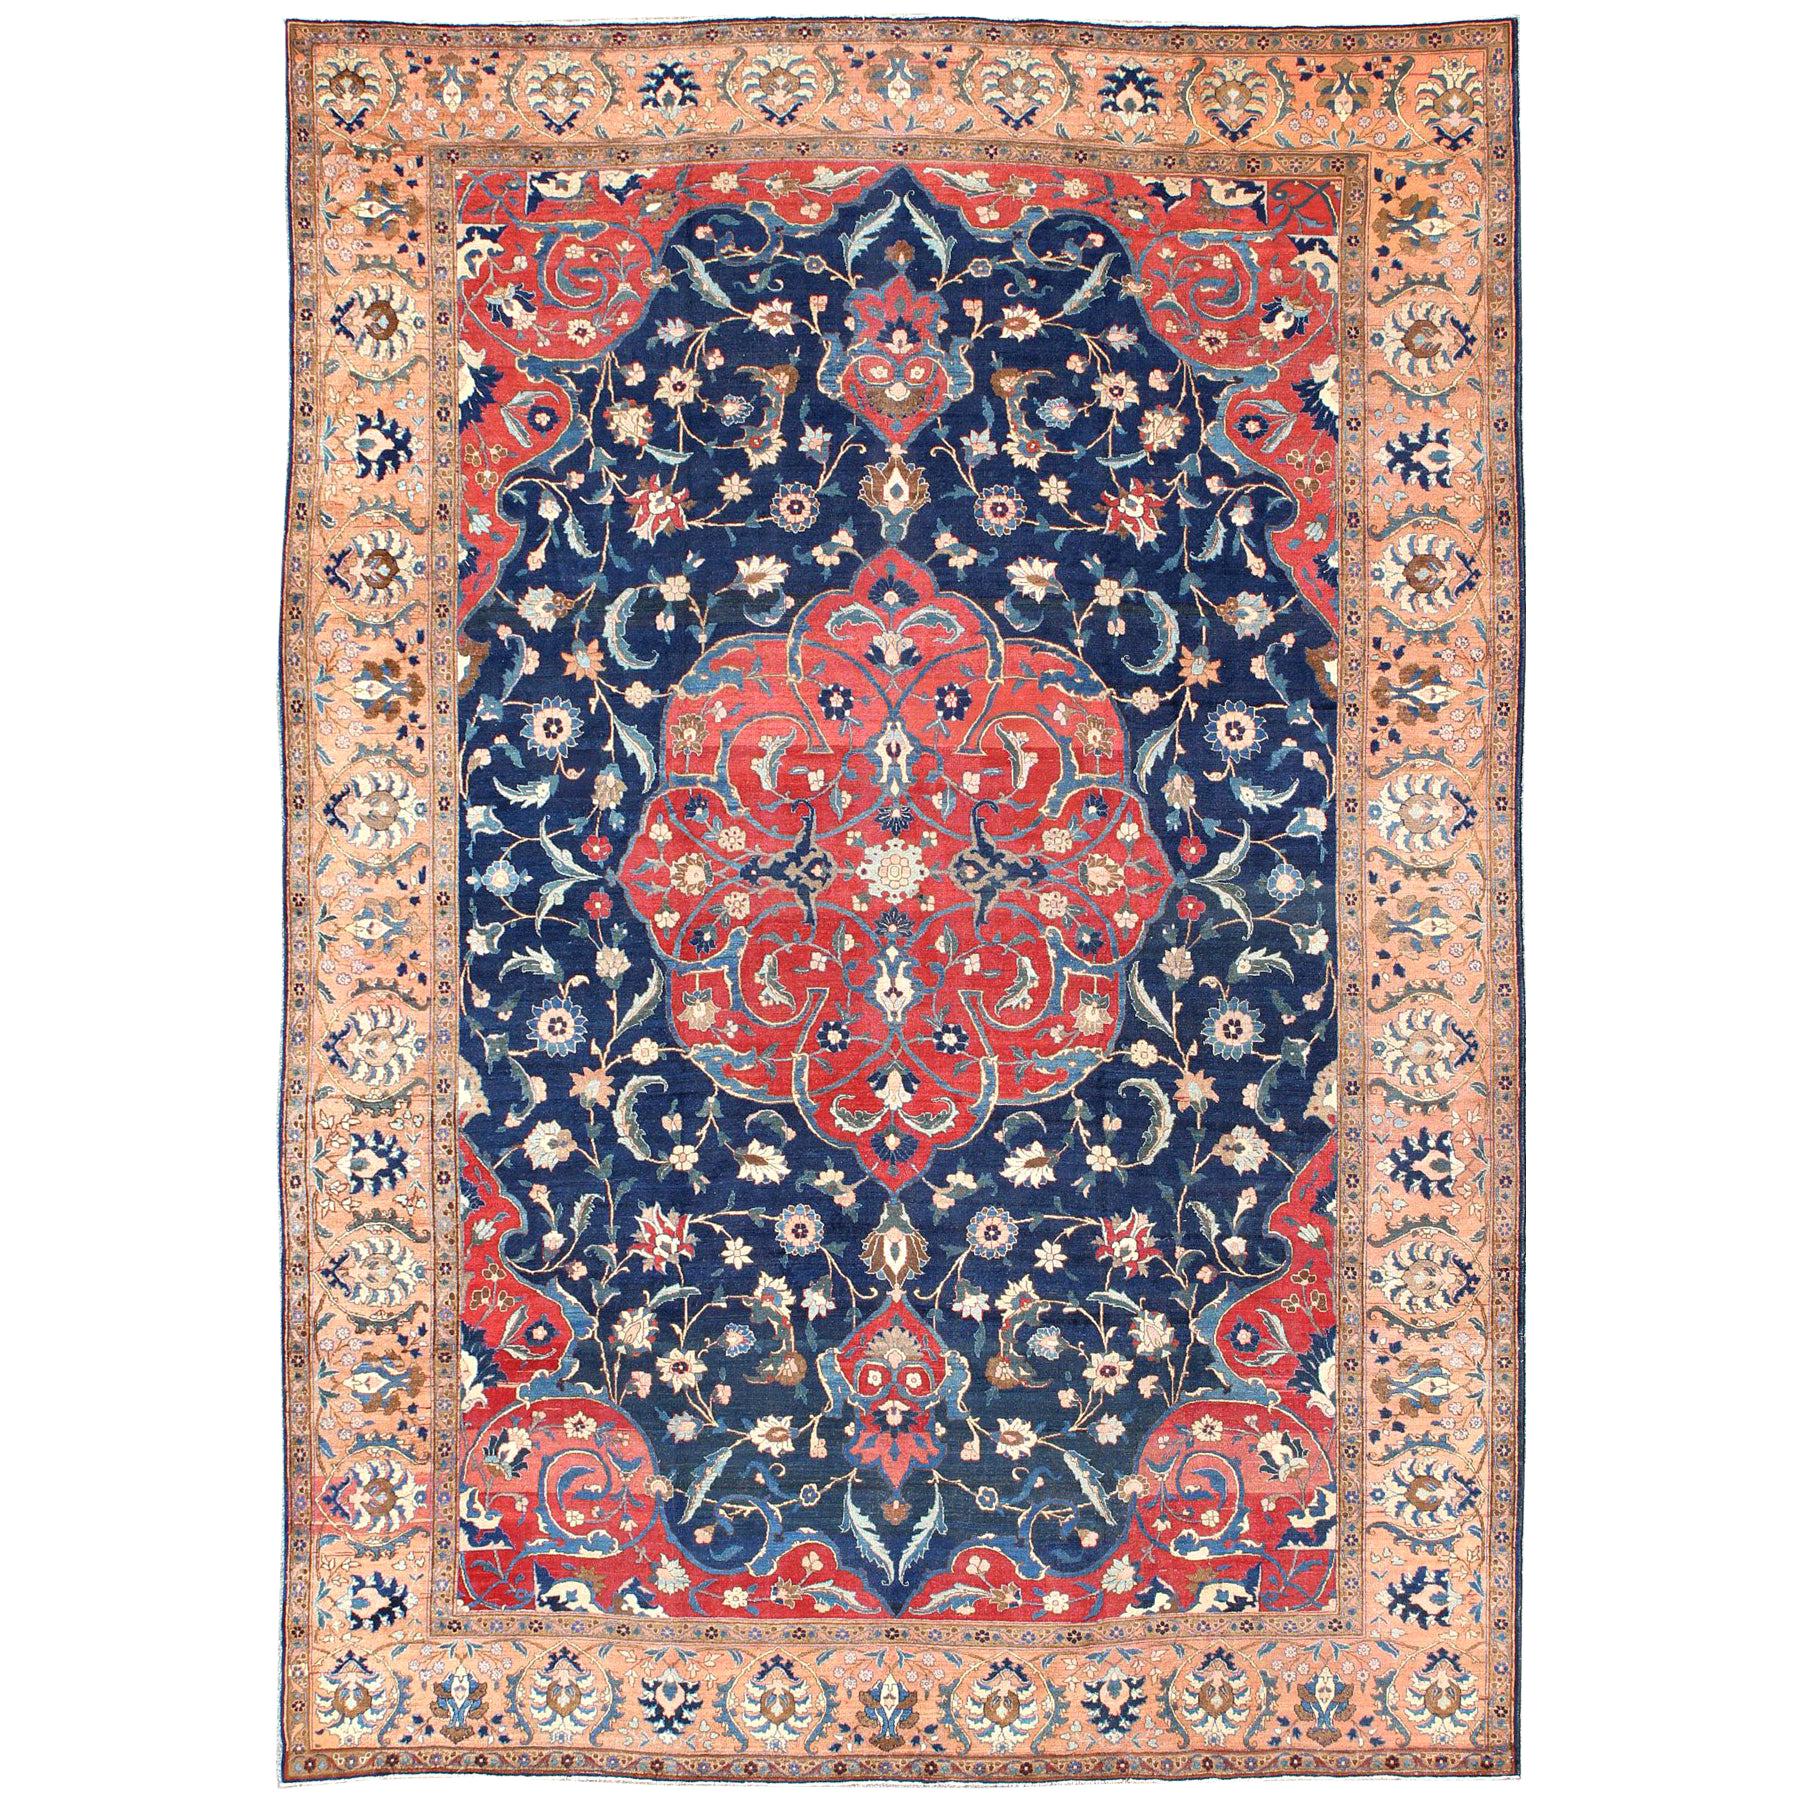 Antique Large Persian Tabriz Rug with Large Flowers On A Navy Background